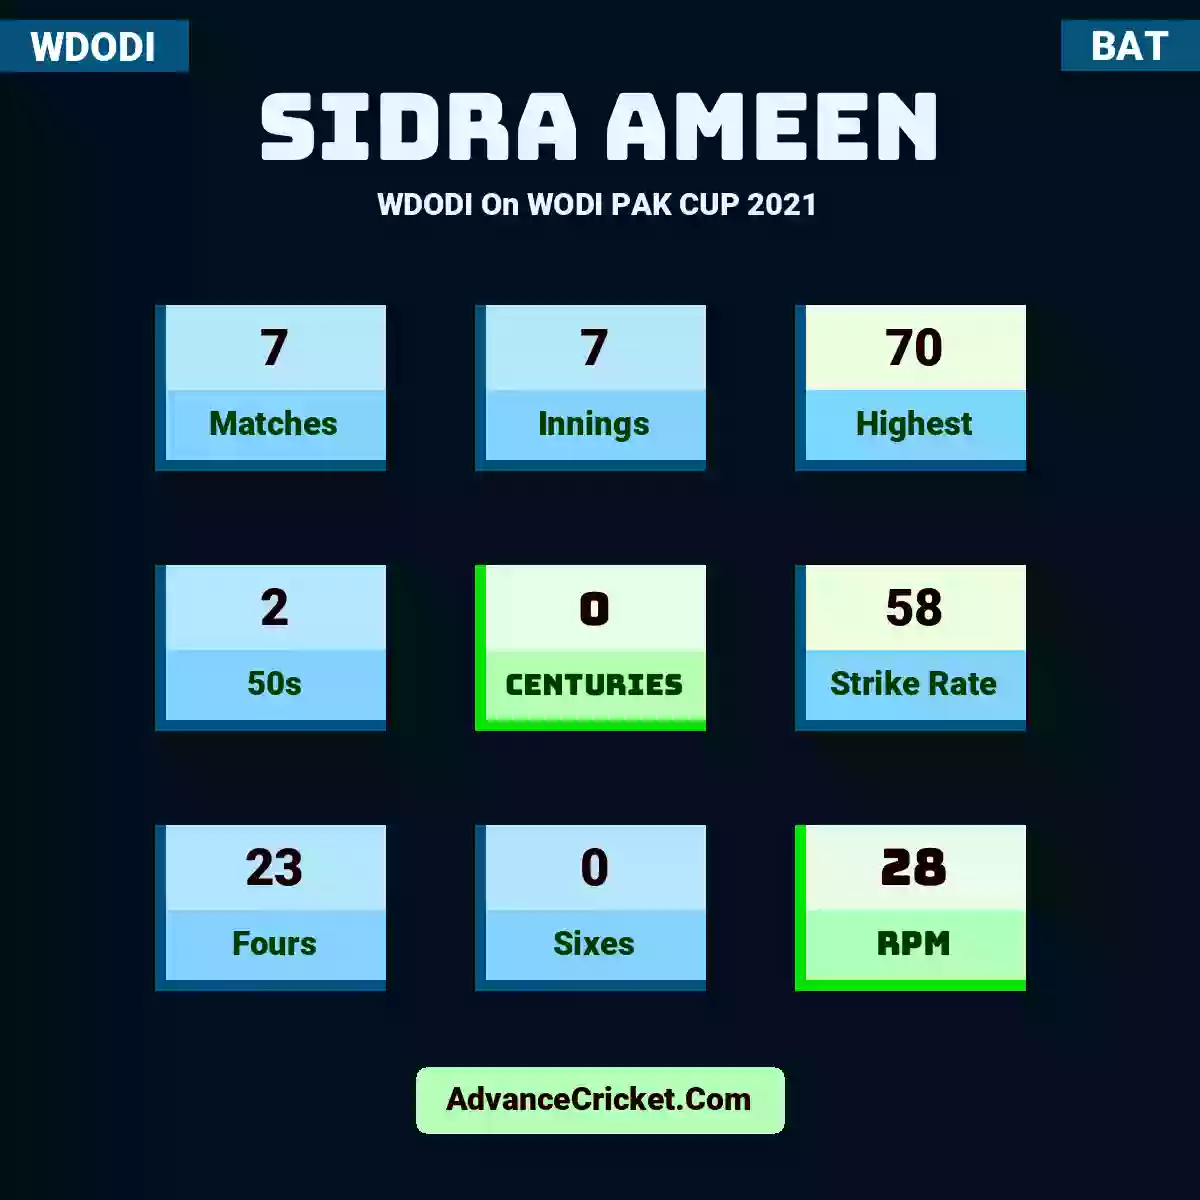 Sidra Ameen WDODI  On WODI PAK CUP 2021, Sidra Ameen played 7 matches, scored 70 runs as highest, 2 half-centuries, and 0 centuries, with a strike rate of 58. S.Ameen hit 23 fours and 0 sixes, with an RPM of 28.